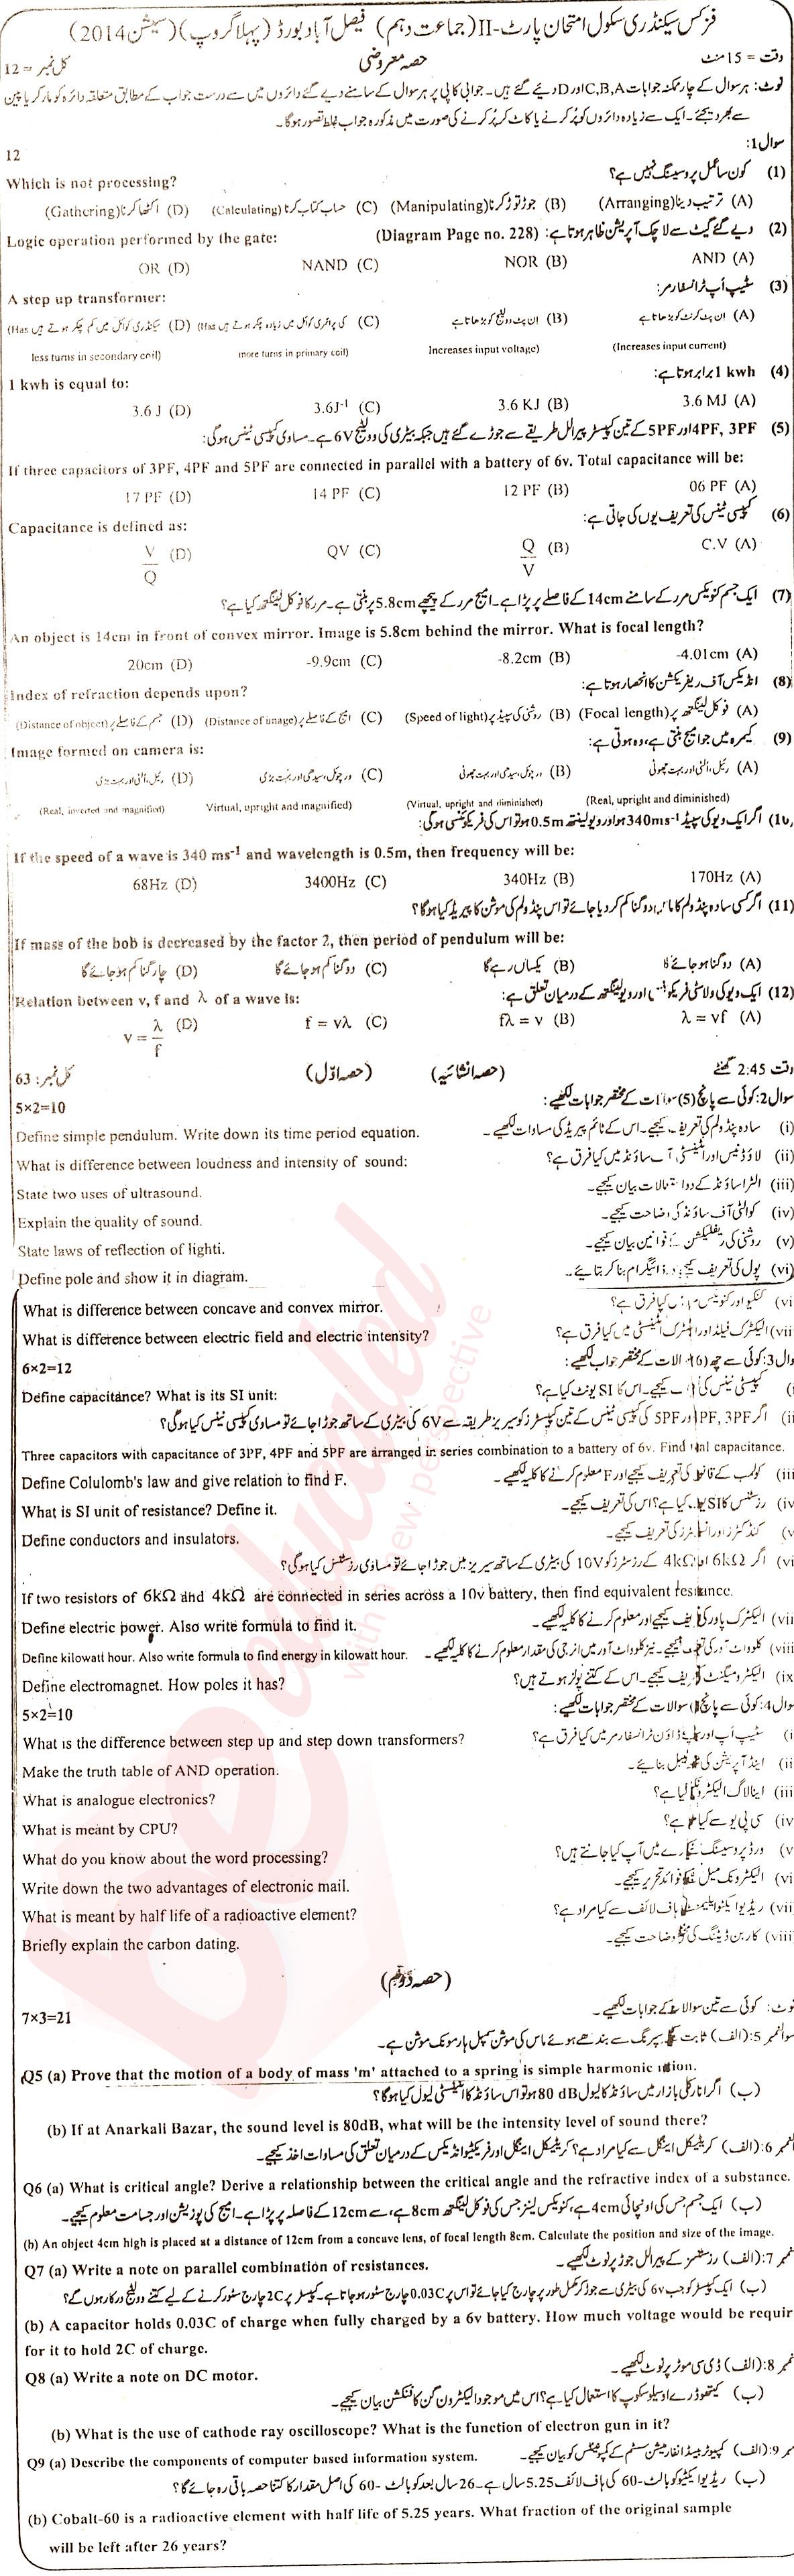 Physics 10th class Past Paper Group 1 BISE Faisalabad 2014